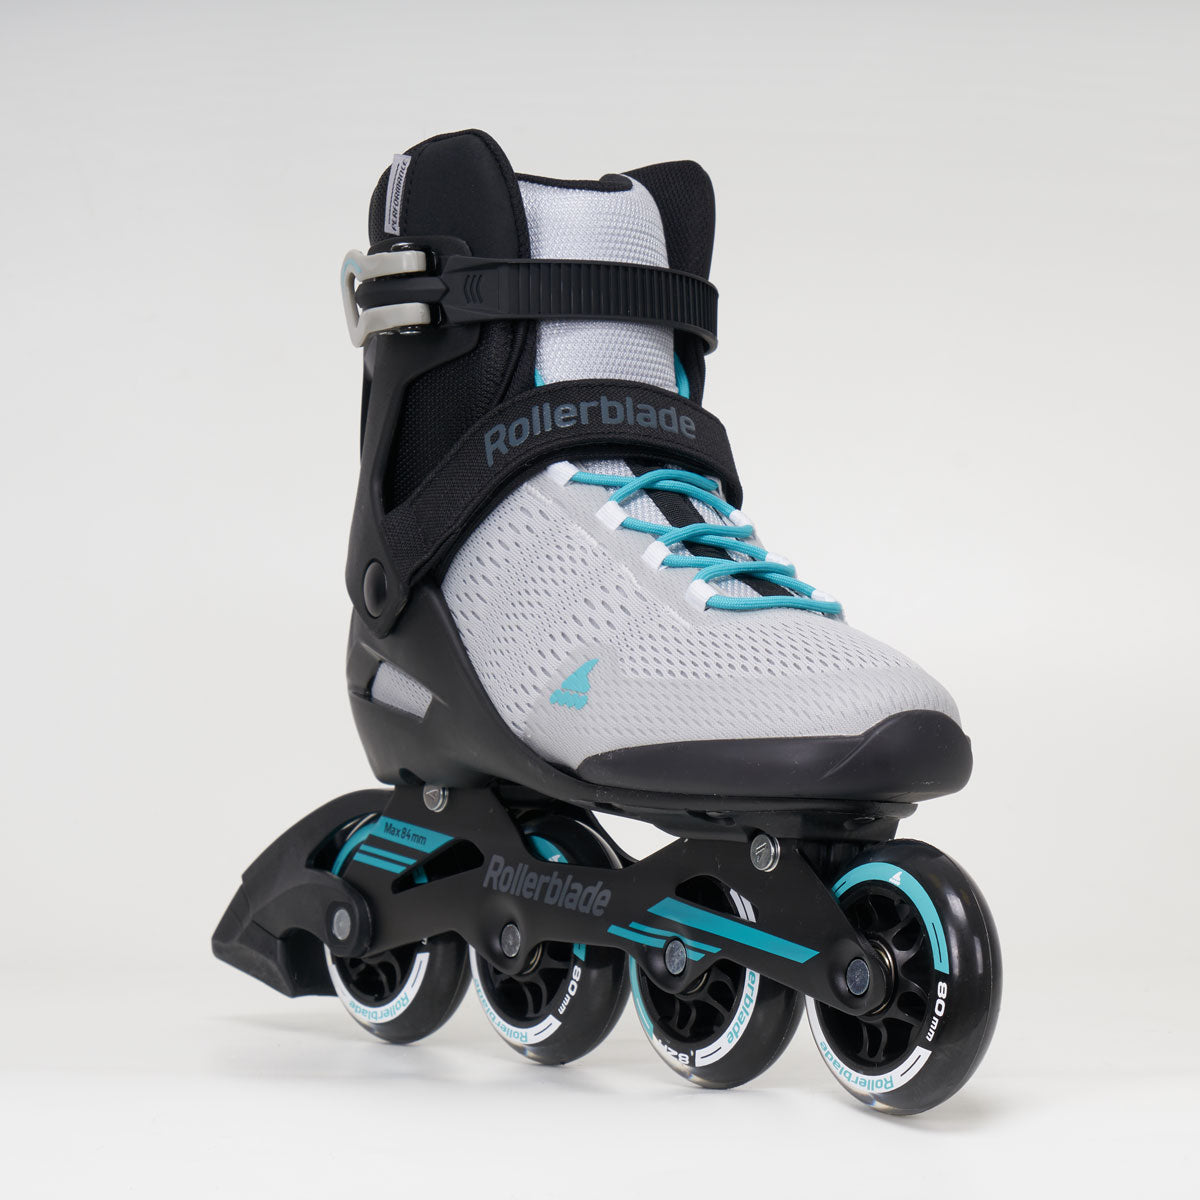 Rollerblade Spark 80 Woman's Inline Skates - Grey/Turquoise